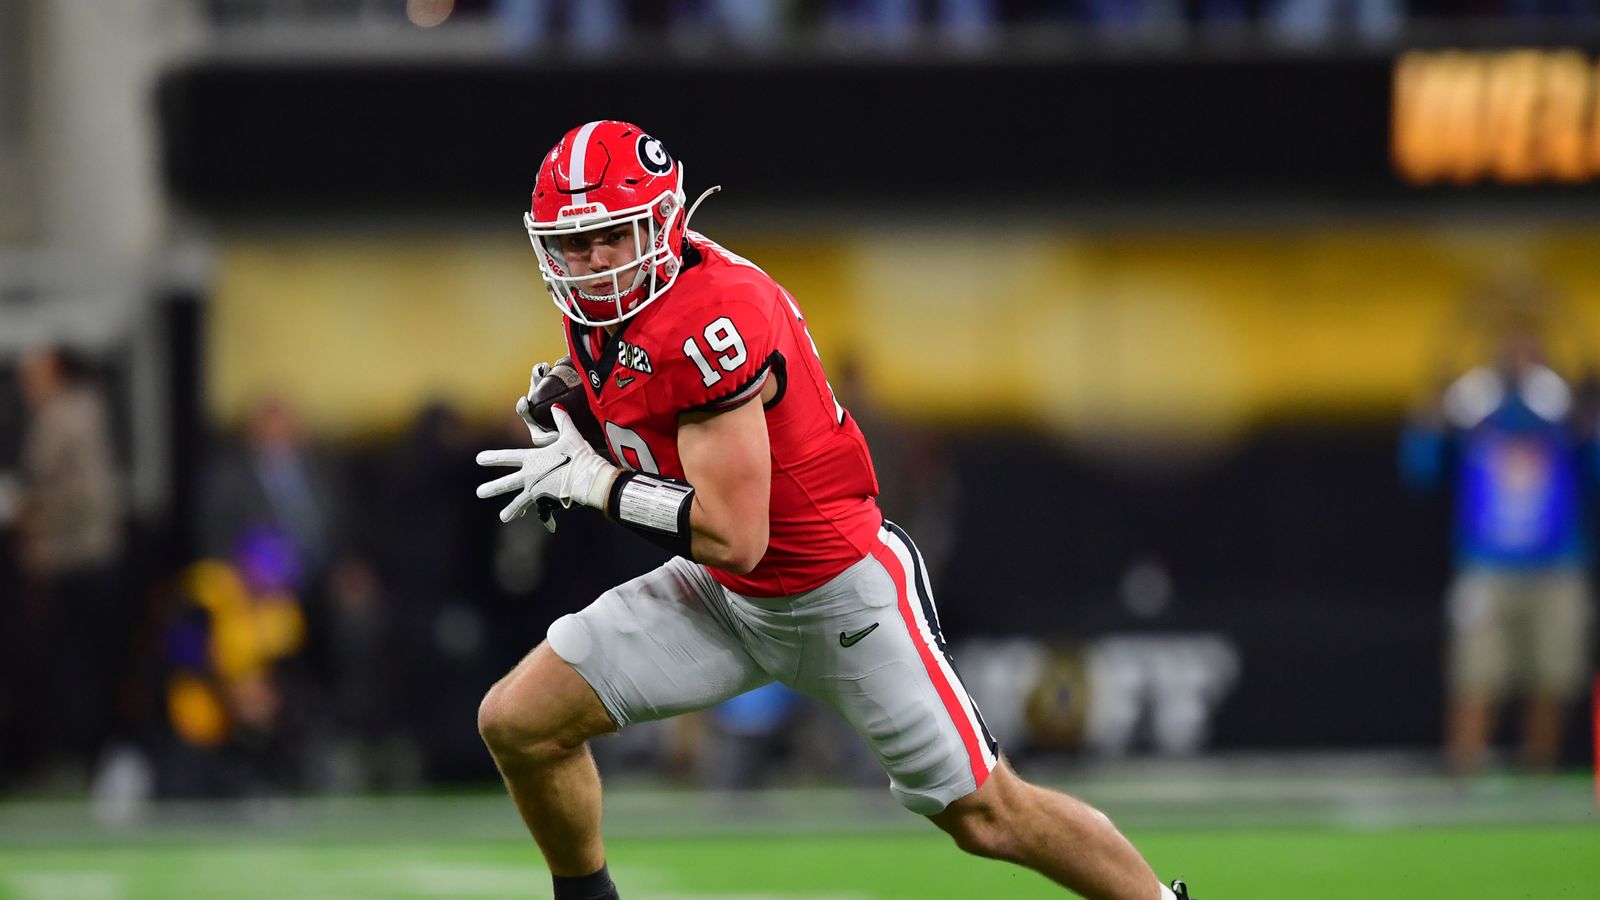 The Las Vegas Raiders' Bold Brock Bowers Pick: A Gamble on Offensive Power?